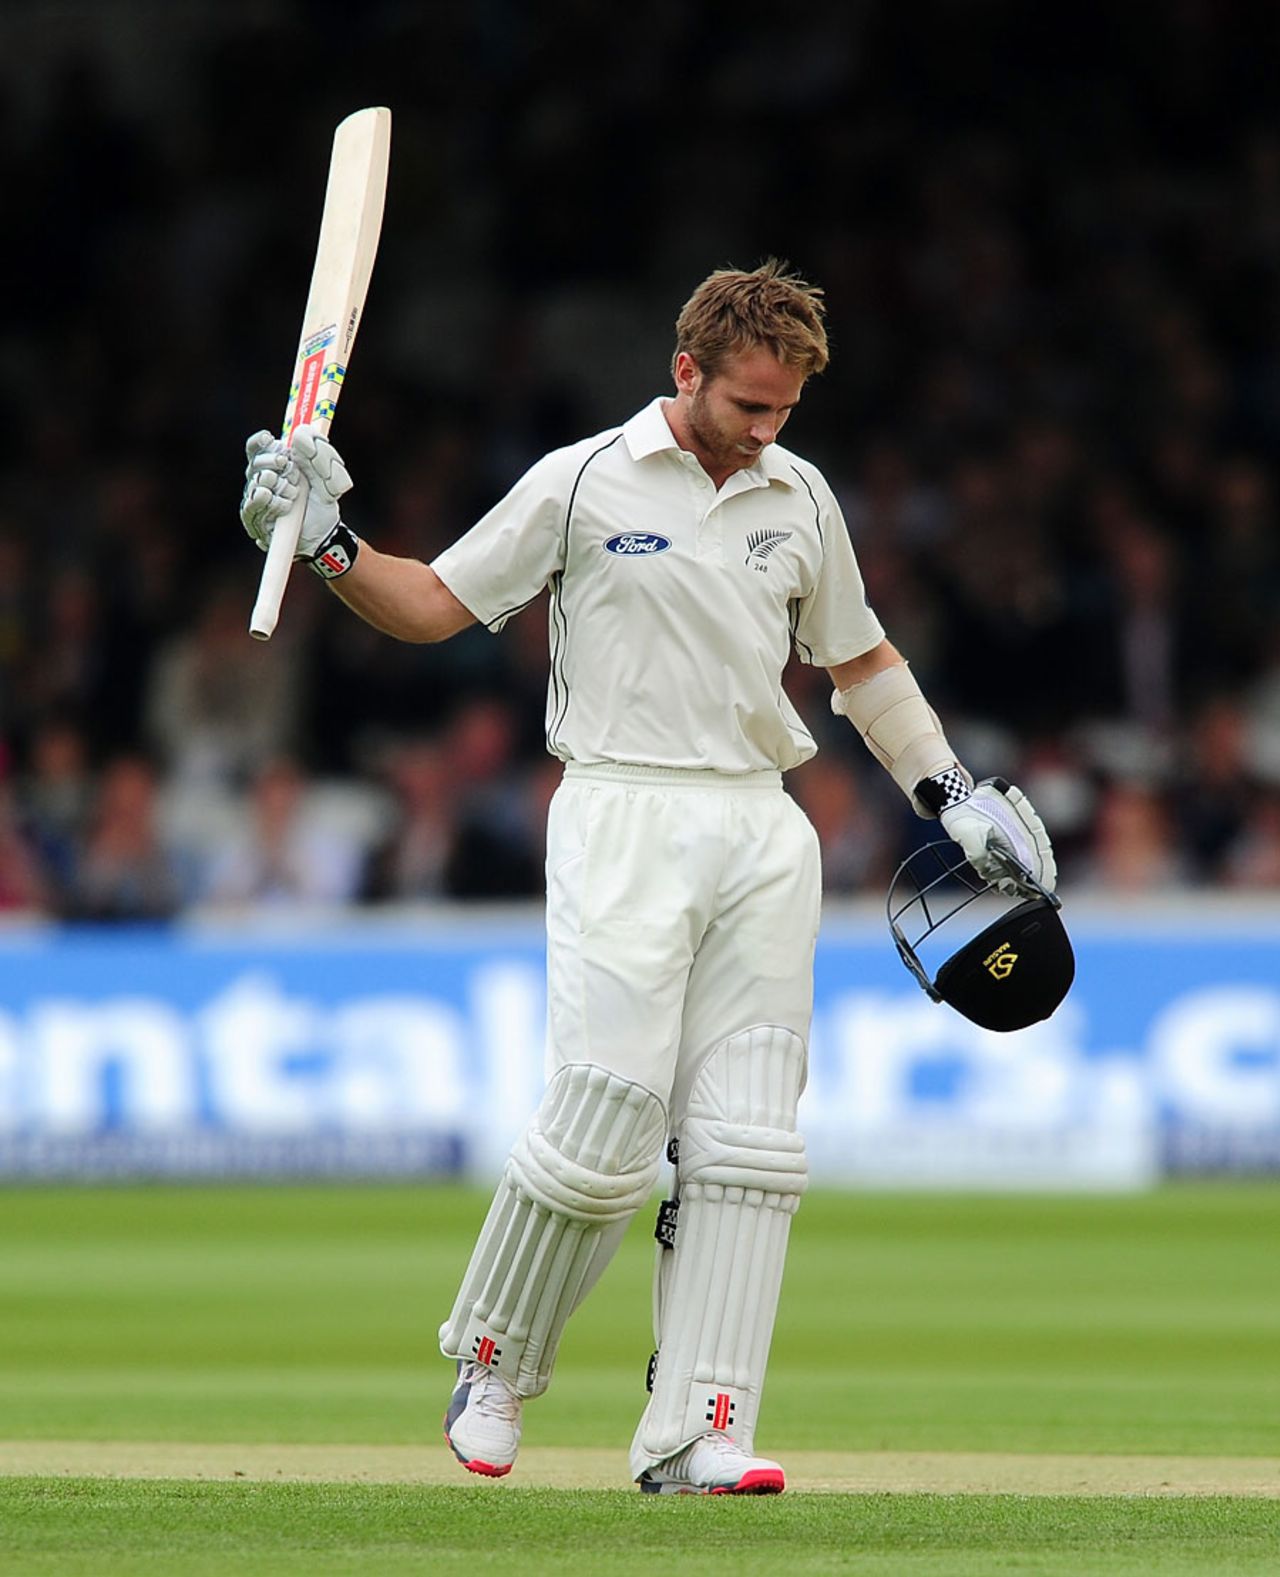 Kane Williamson moved to his 10th Test hundred, England v New Zealand, 1st Investec Test, Lord's, 3rd day, May 23, 2015